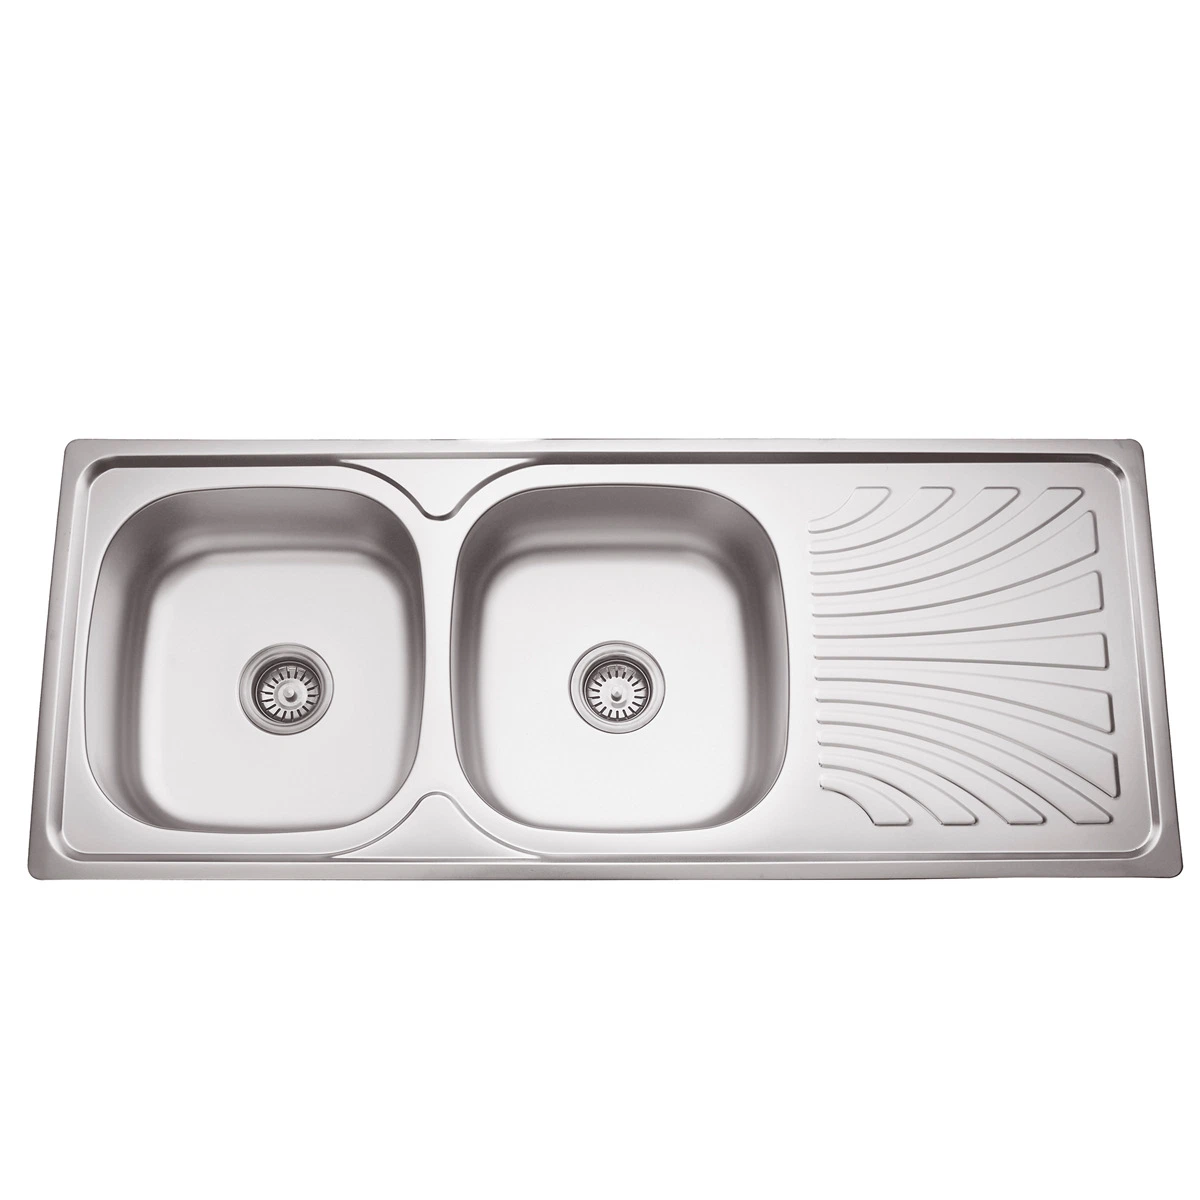 Stainless Kitchen Double Bowl with Drain Sink Wda12050-F